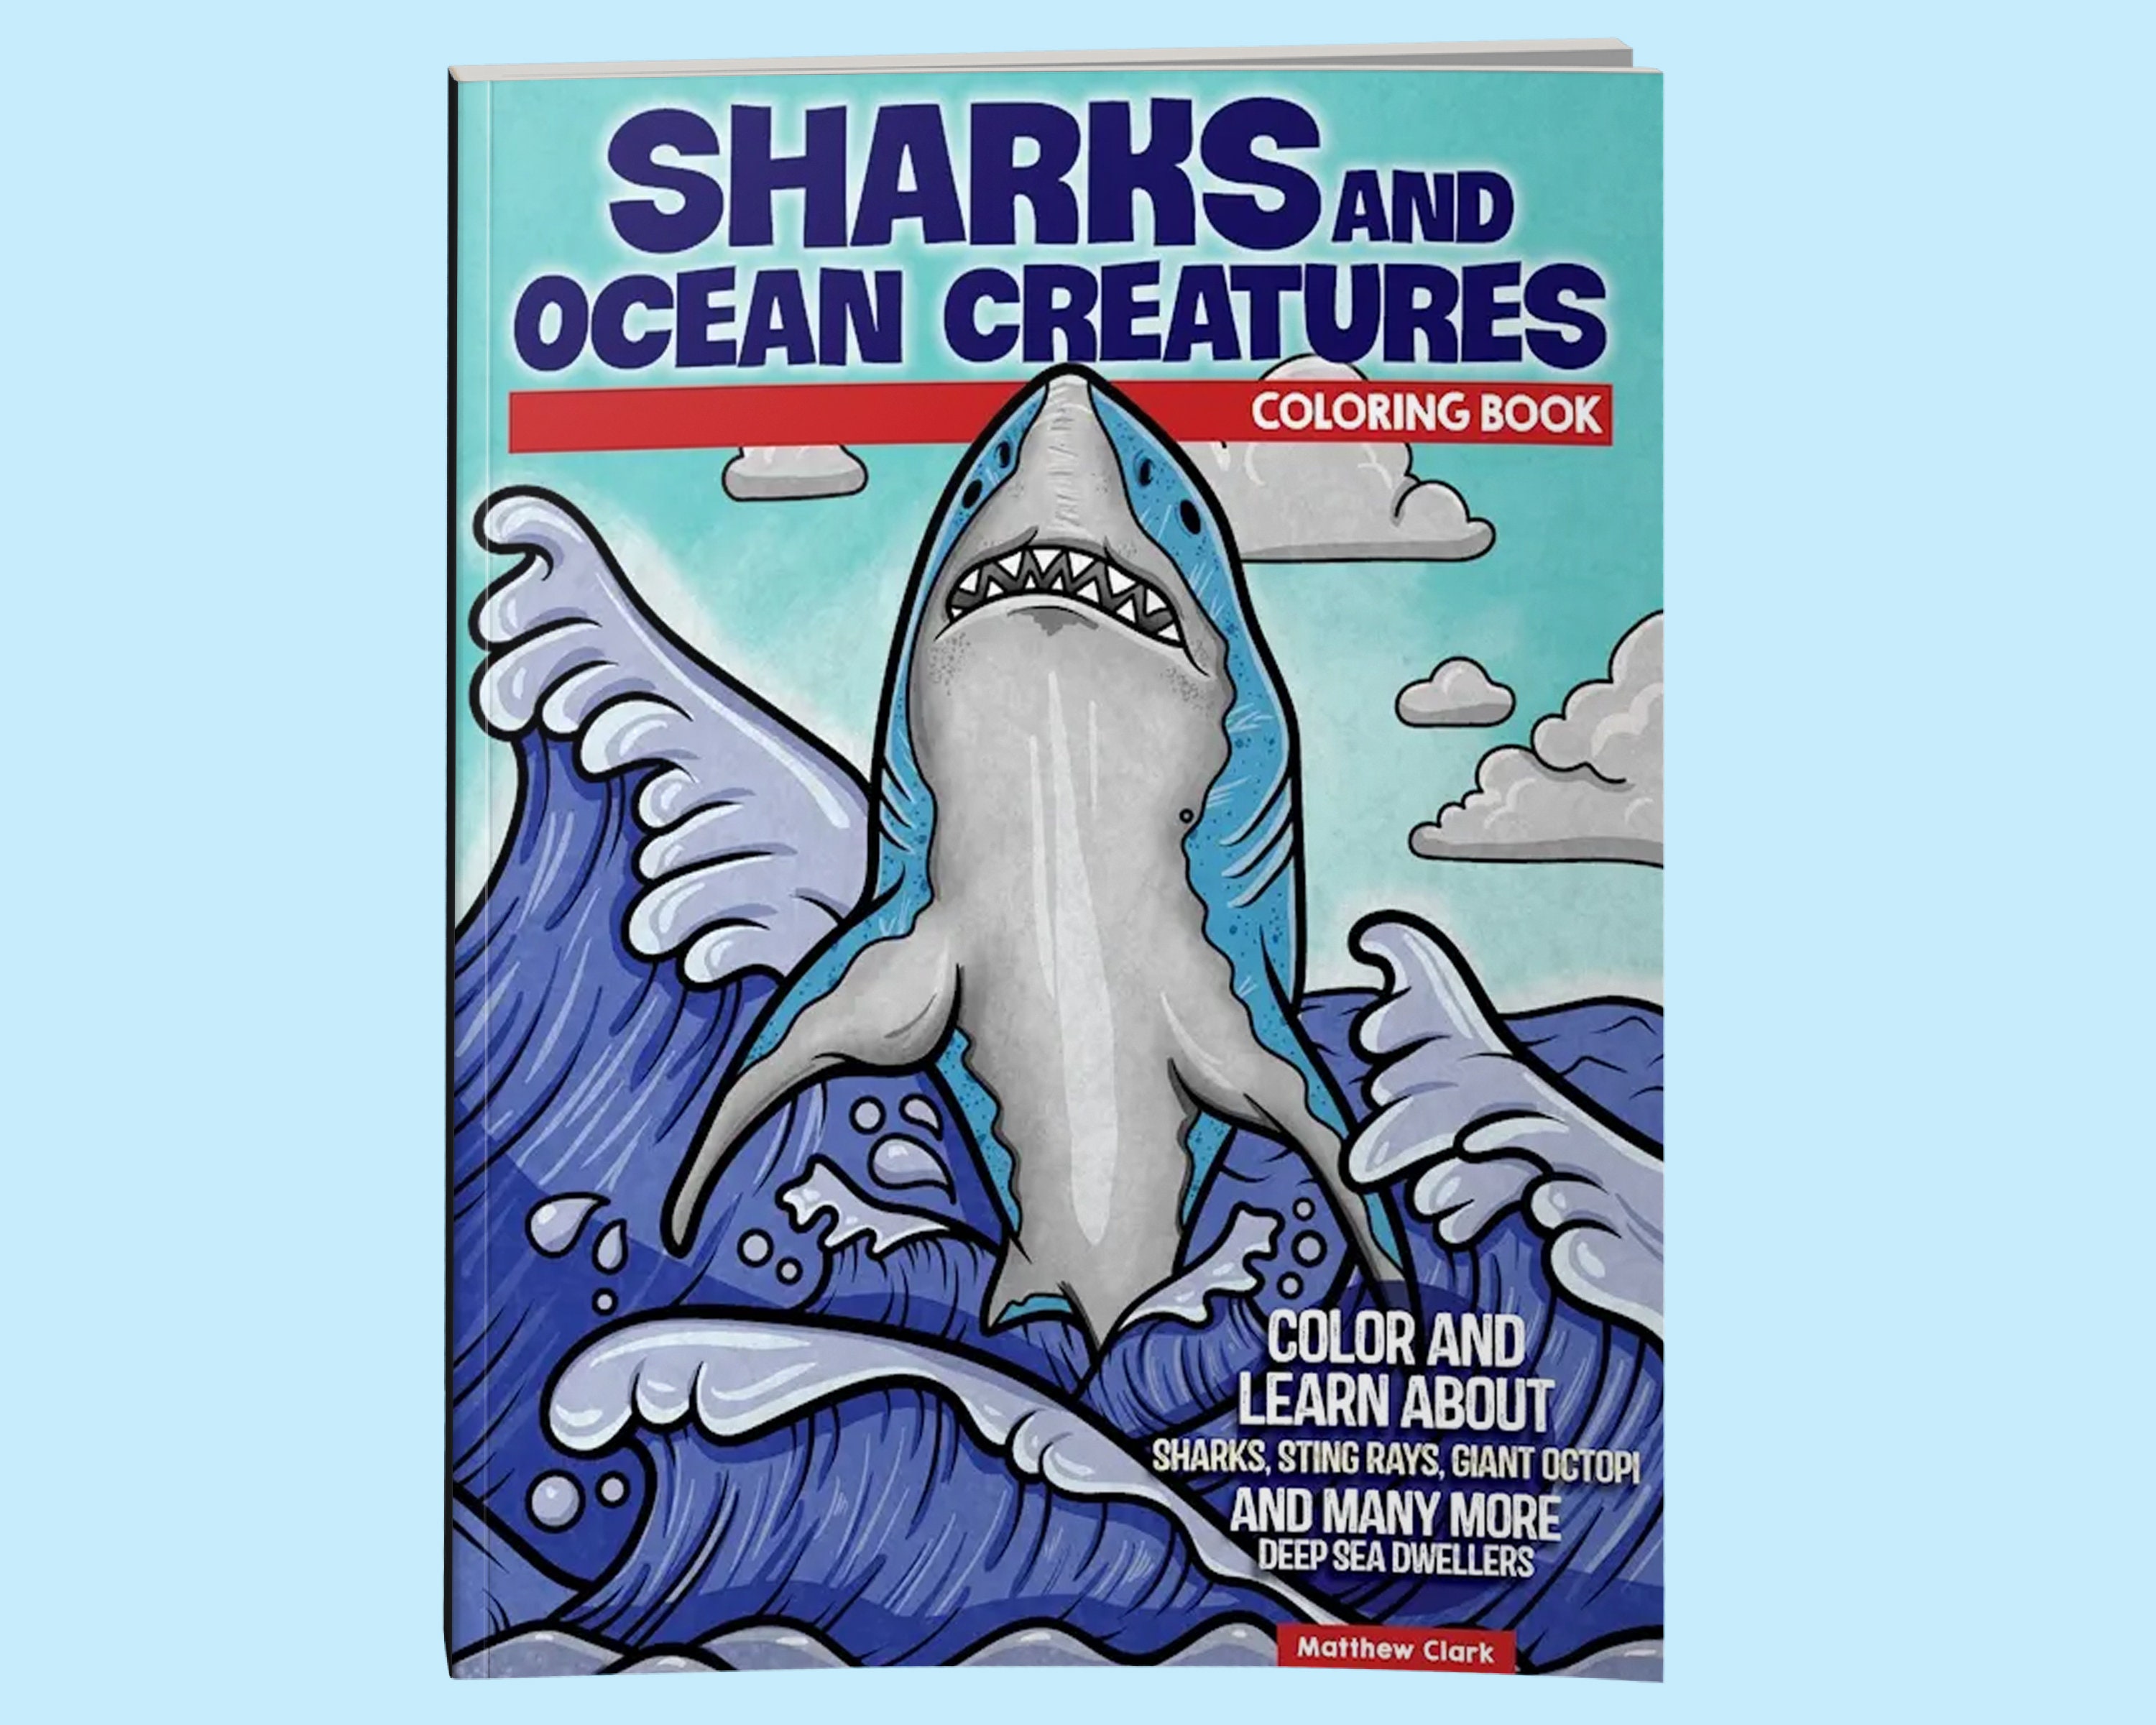 Number Lore free coloring pages - Busy Shark  Free coloring pages,  Coloring pages, Coloring books